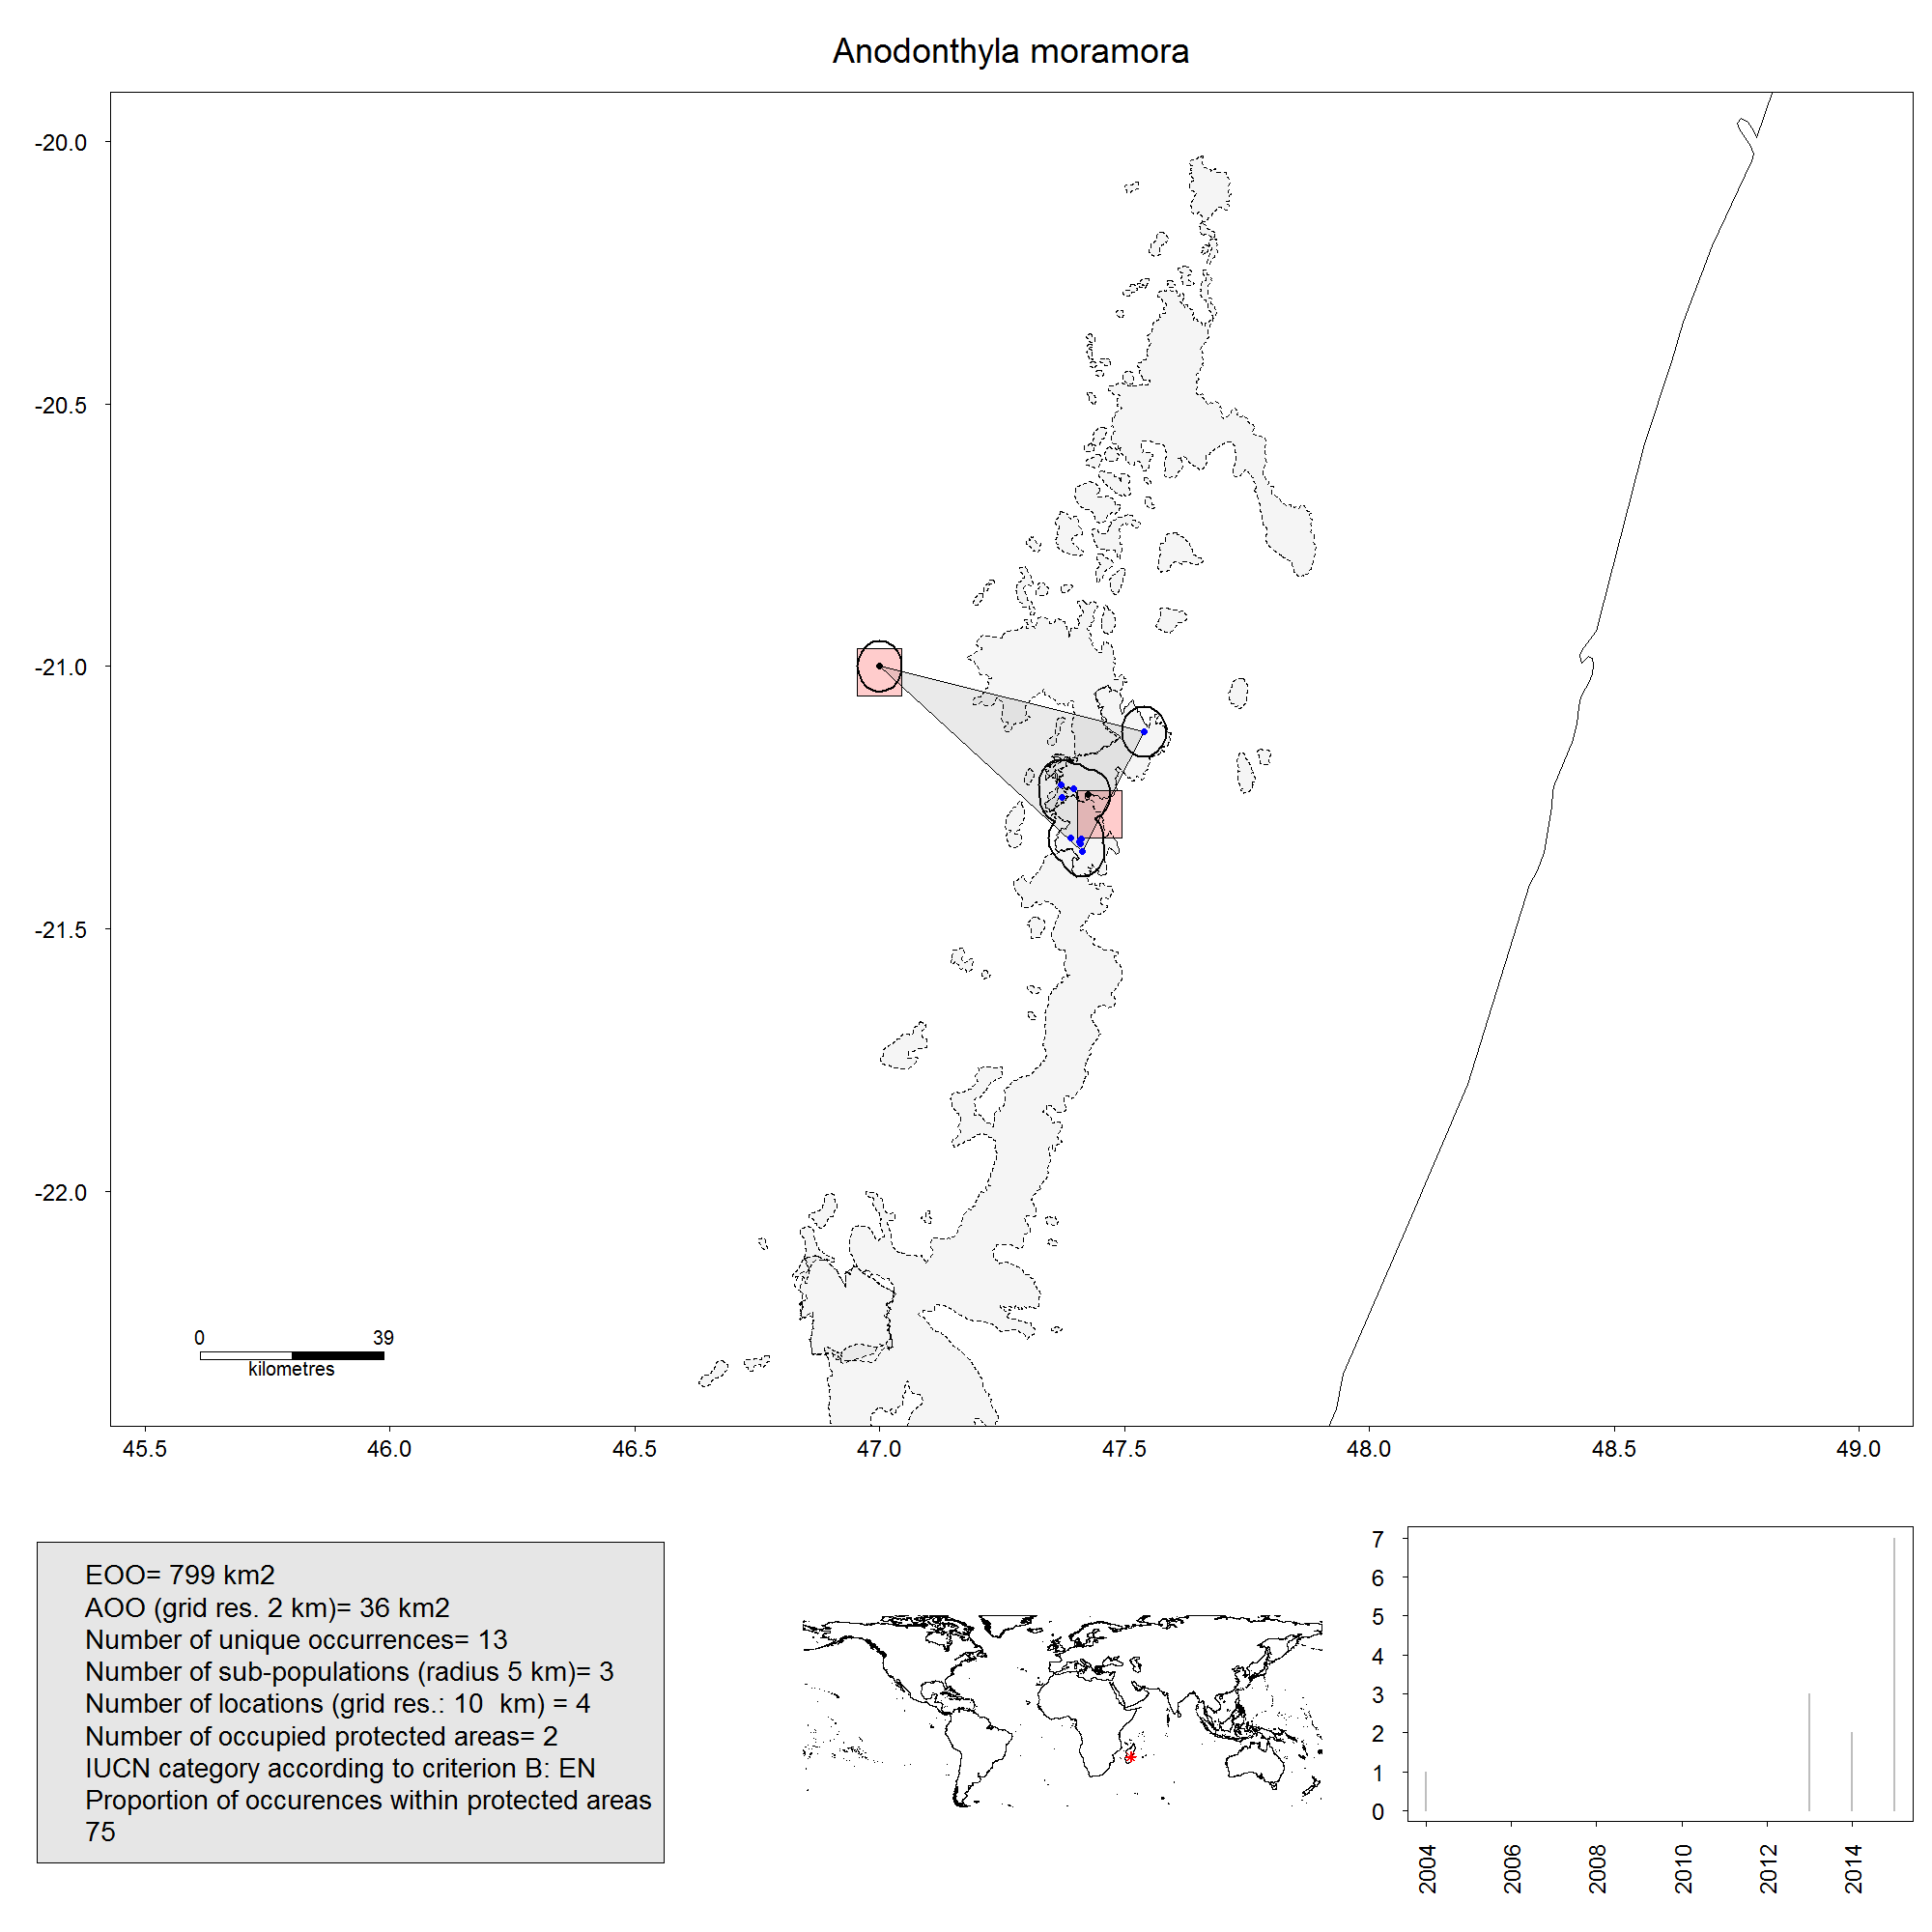 Example of a map output exported in IUCN_results_map directory